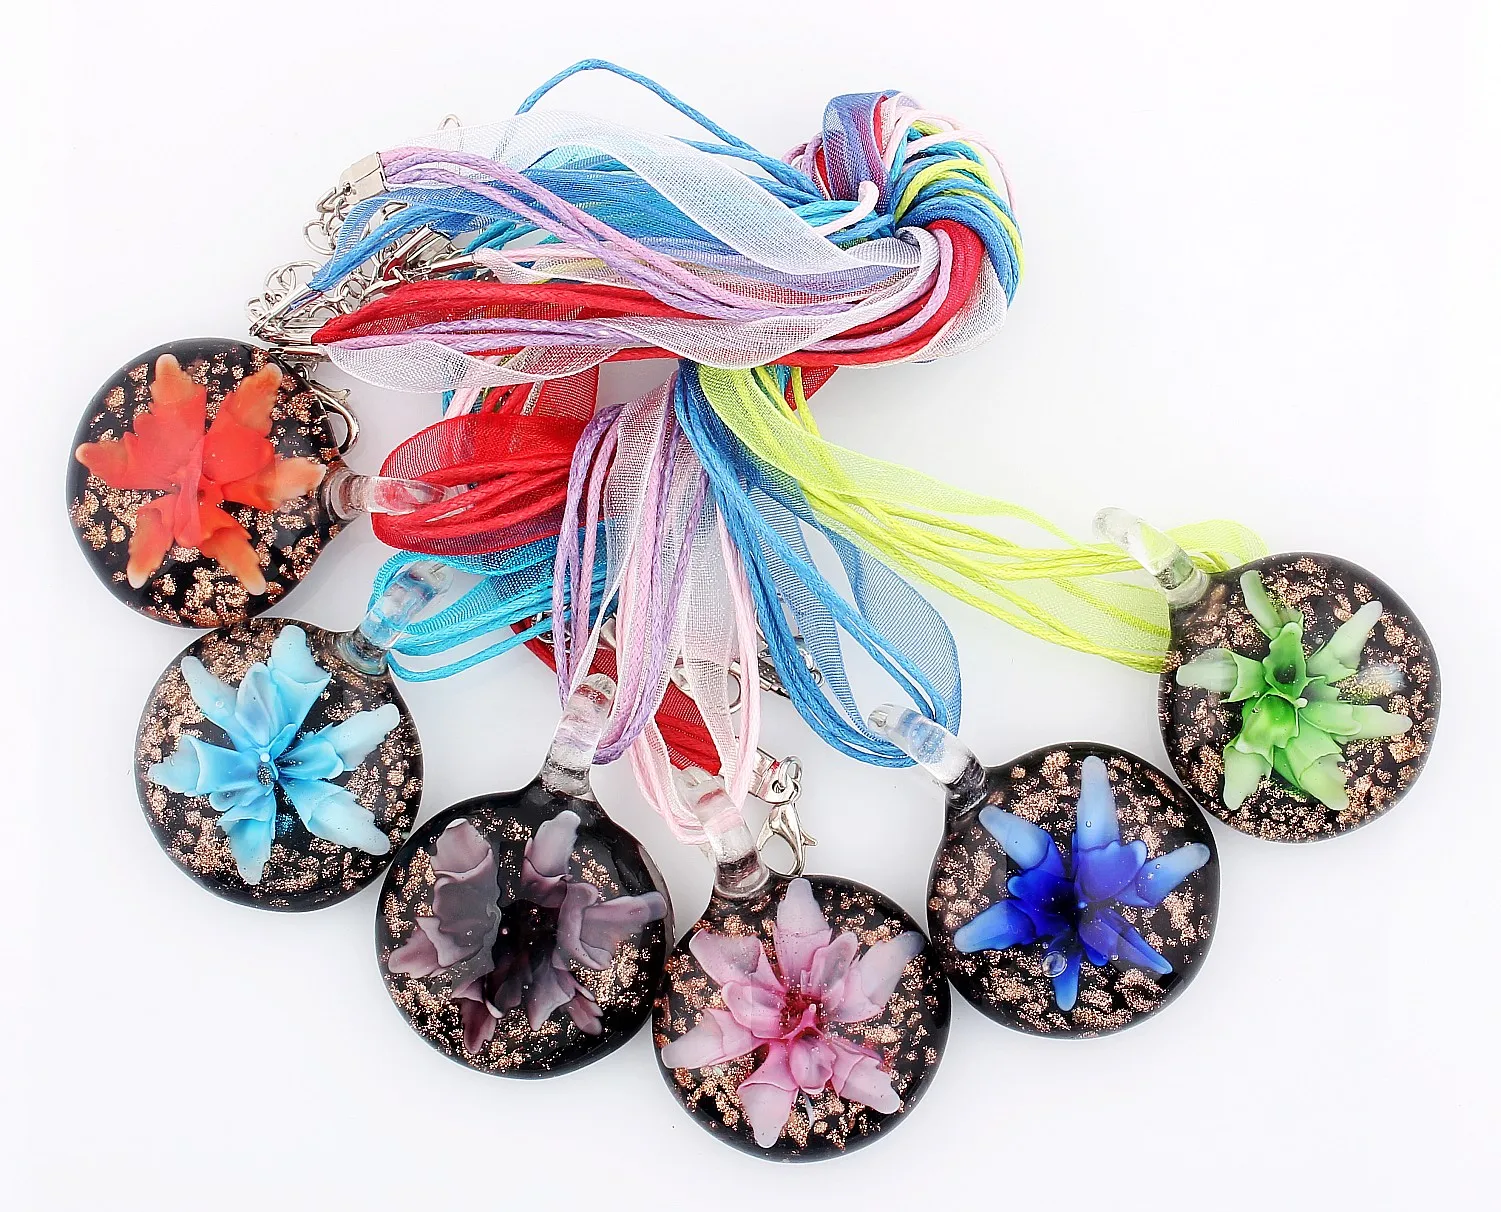 

Hot Sell Wholesale Lots 6pcs Murano Lampwork Glass Round Beauty Flower Charm Pendant Necklaces For Women's Jewelry